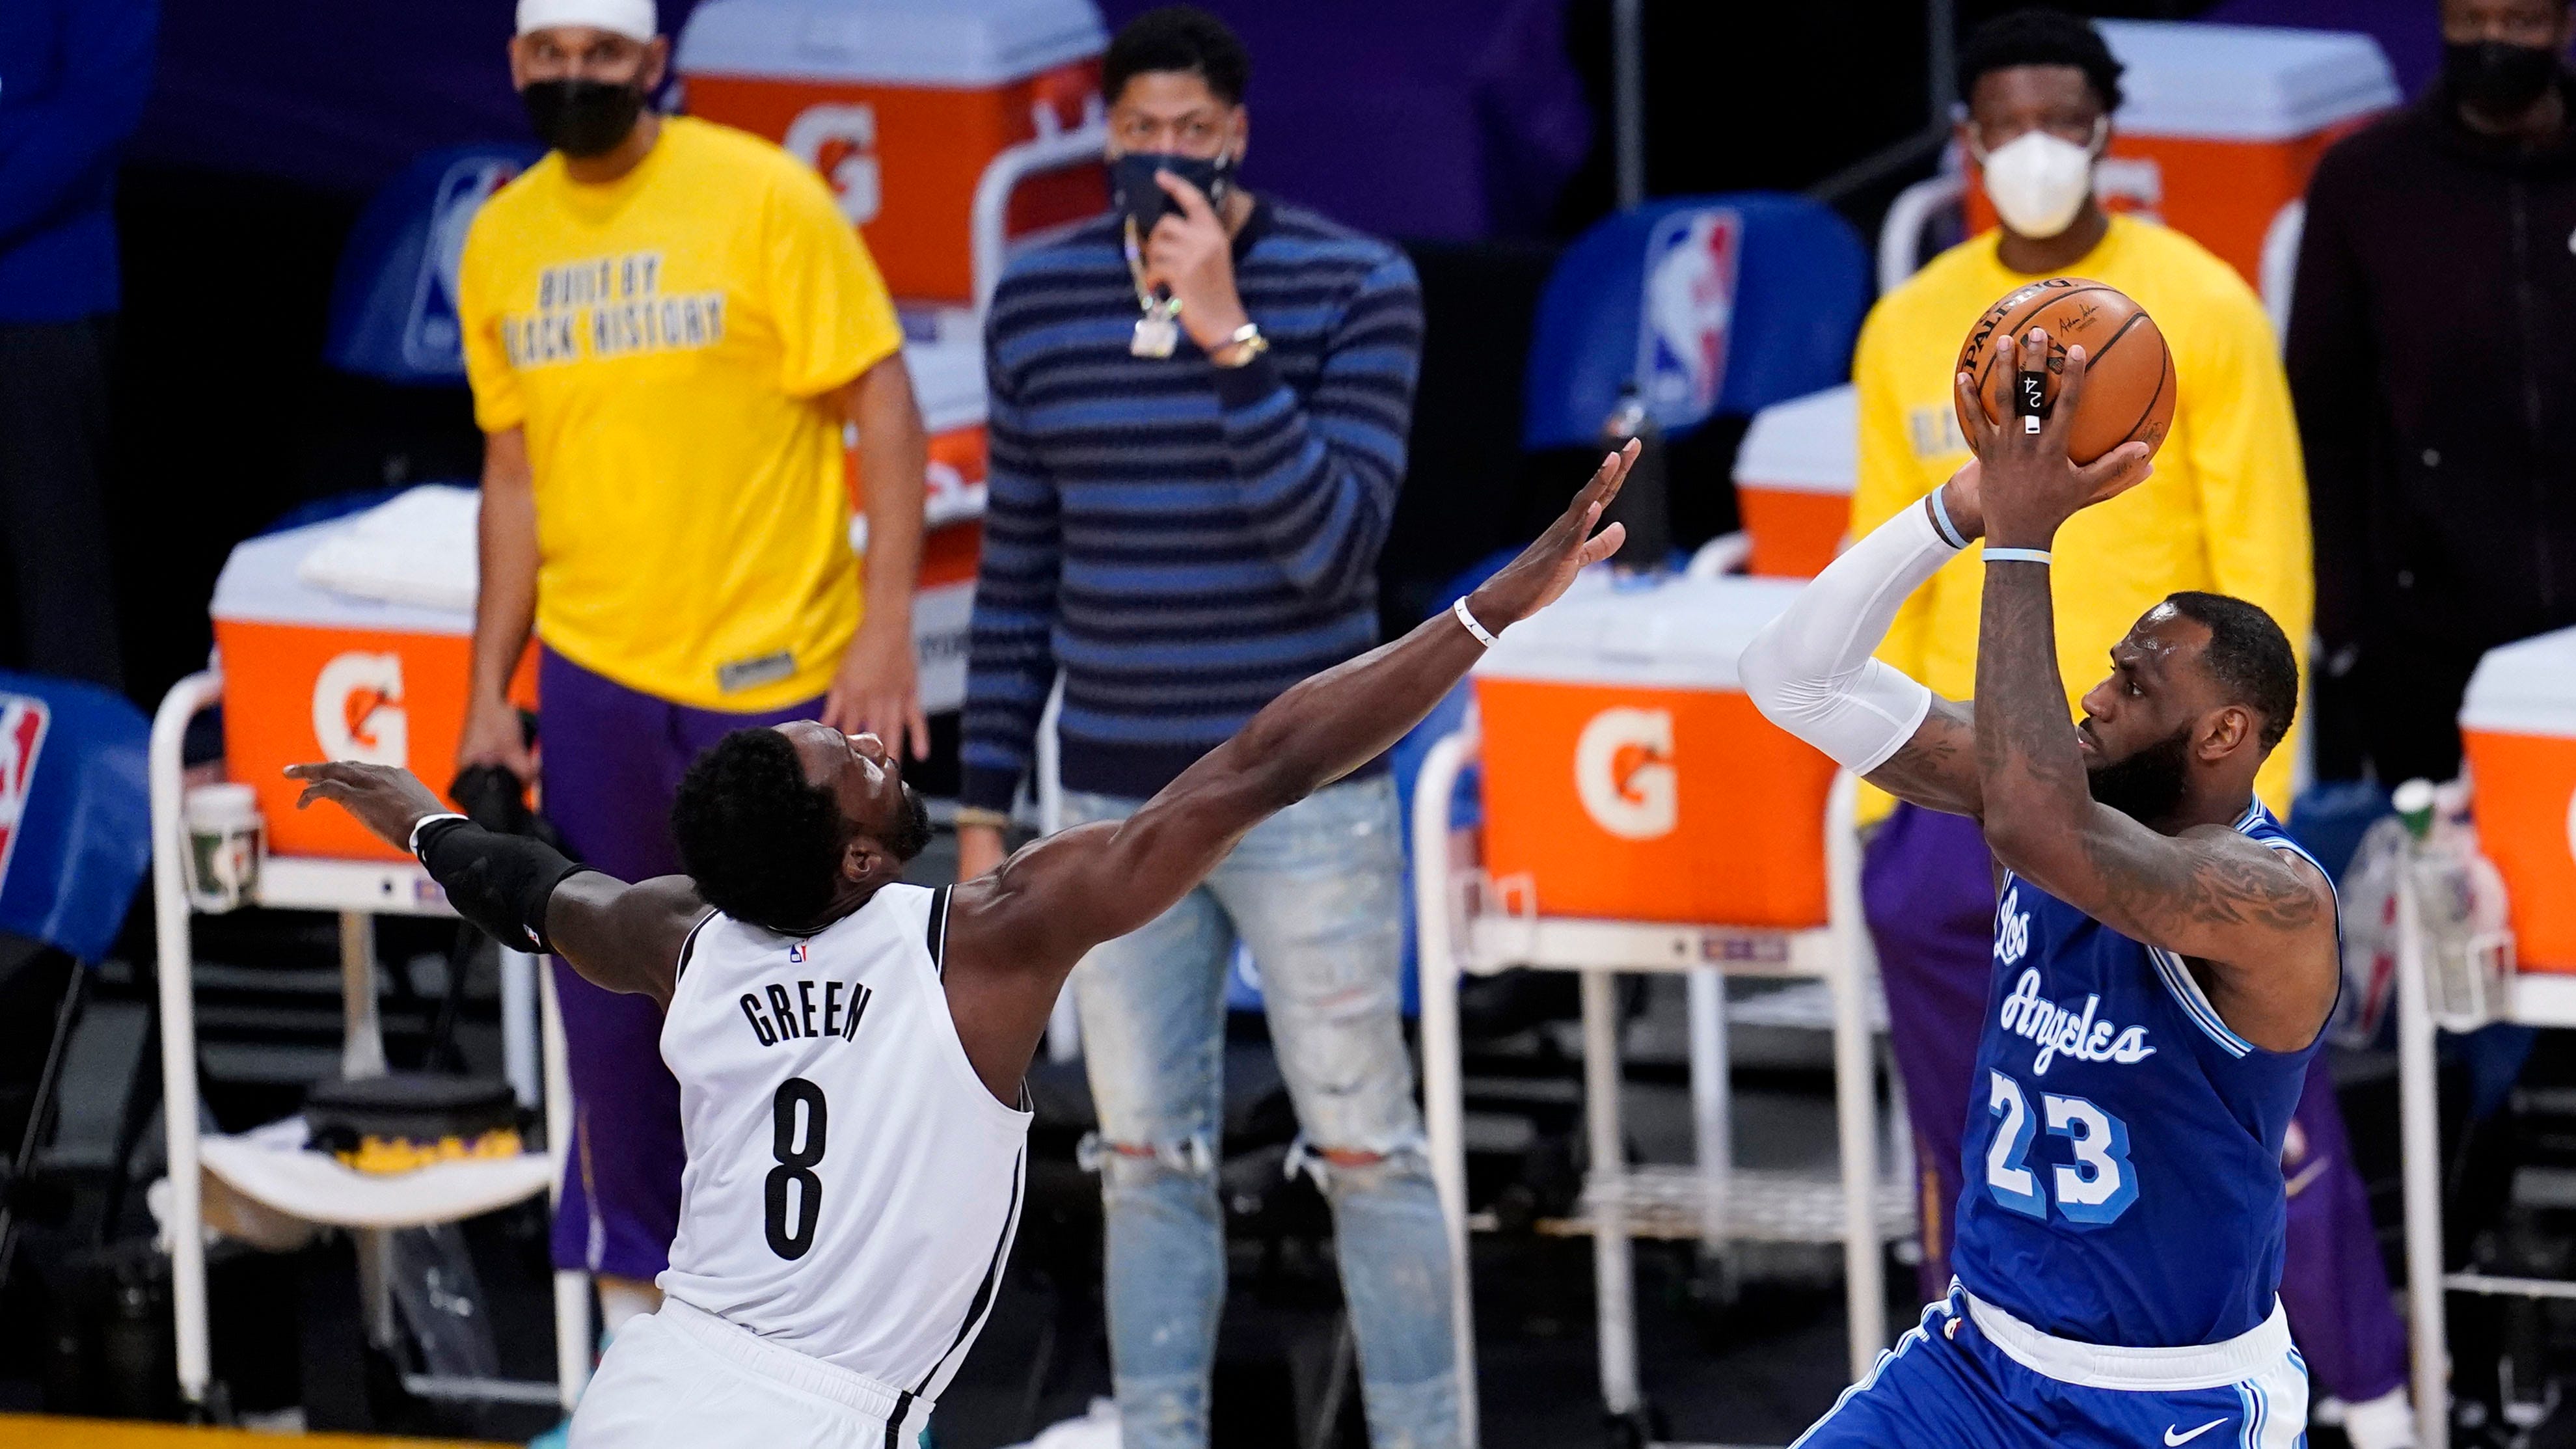 The waste of Kyrie Irving speaks to LeBron James ‘free throw as Nets’ best Lakers 109-98